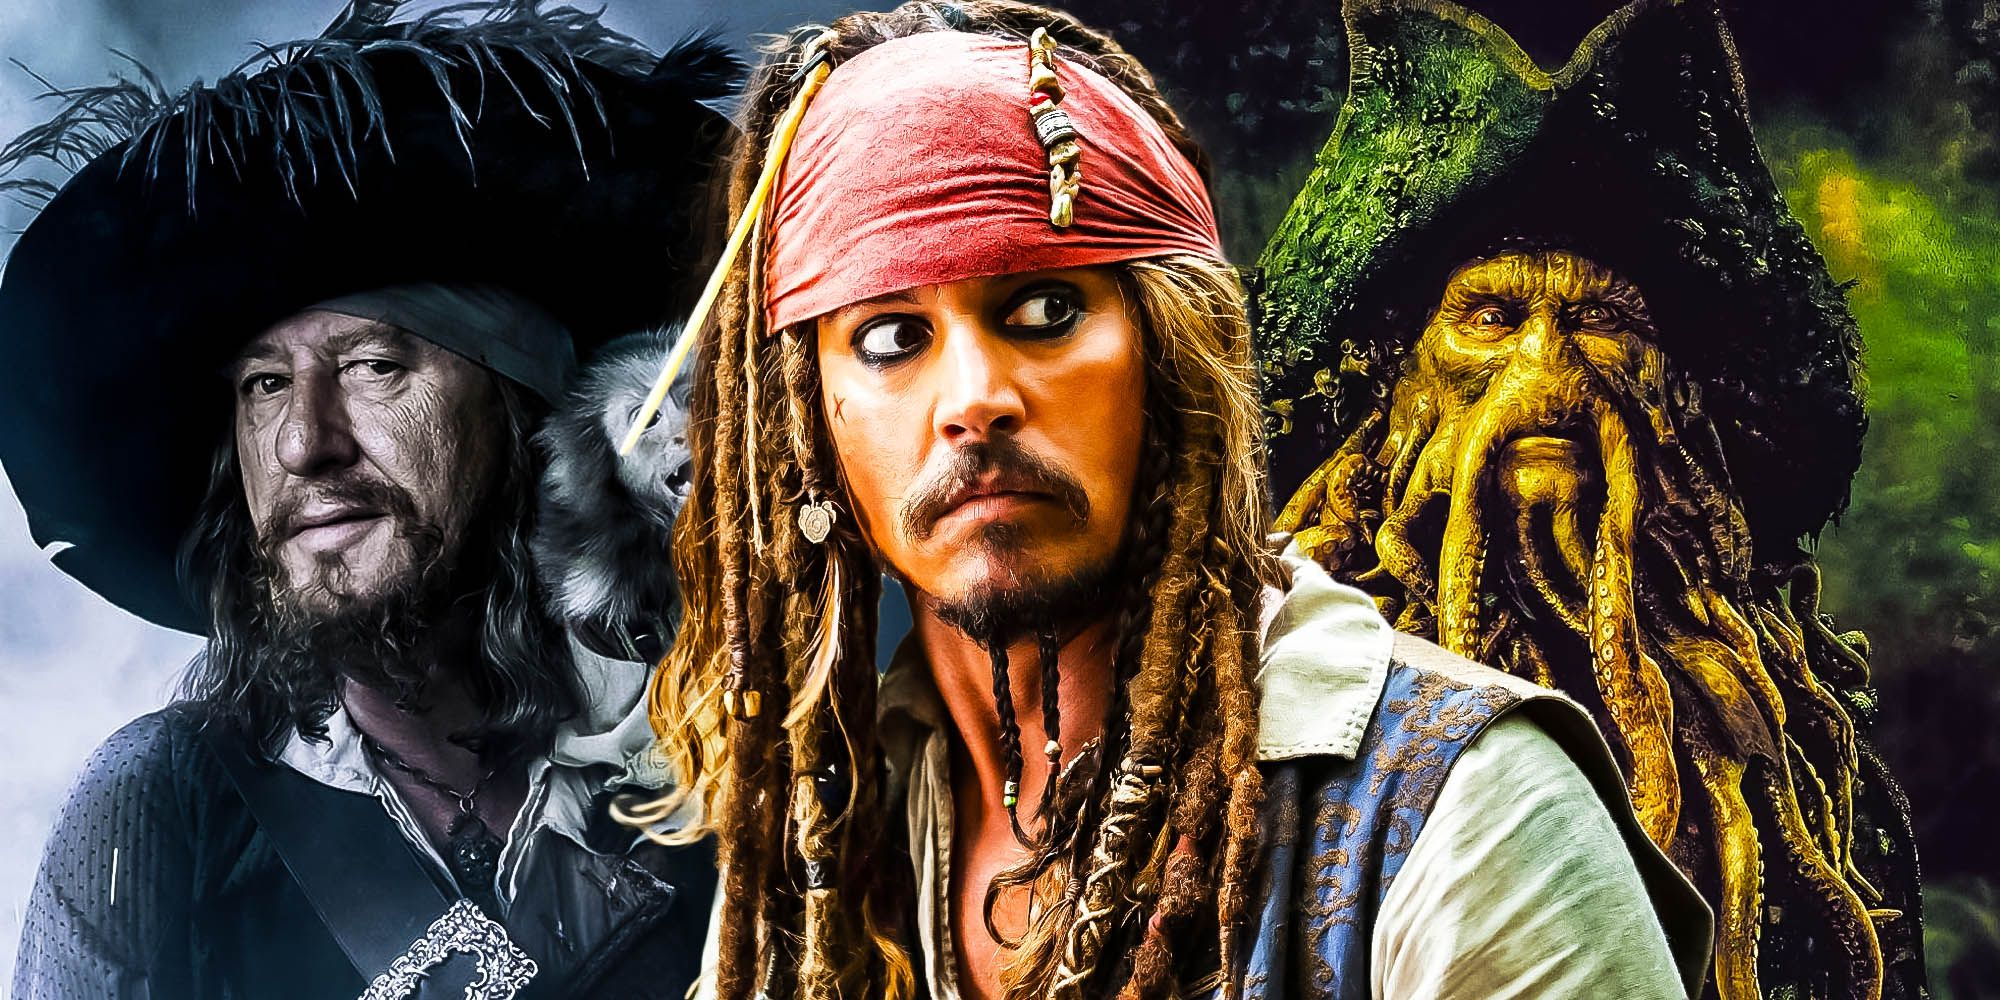 Pirates of the Caribbean collage of Barbossa, Jack Sparrow, and Davy Jones